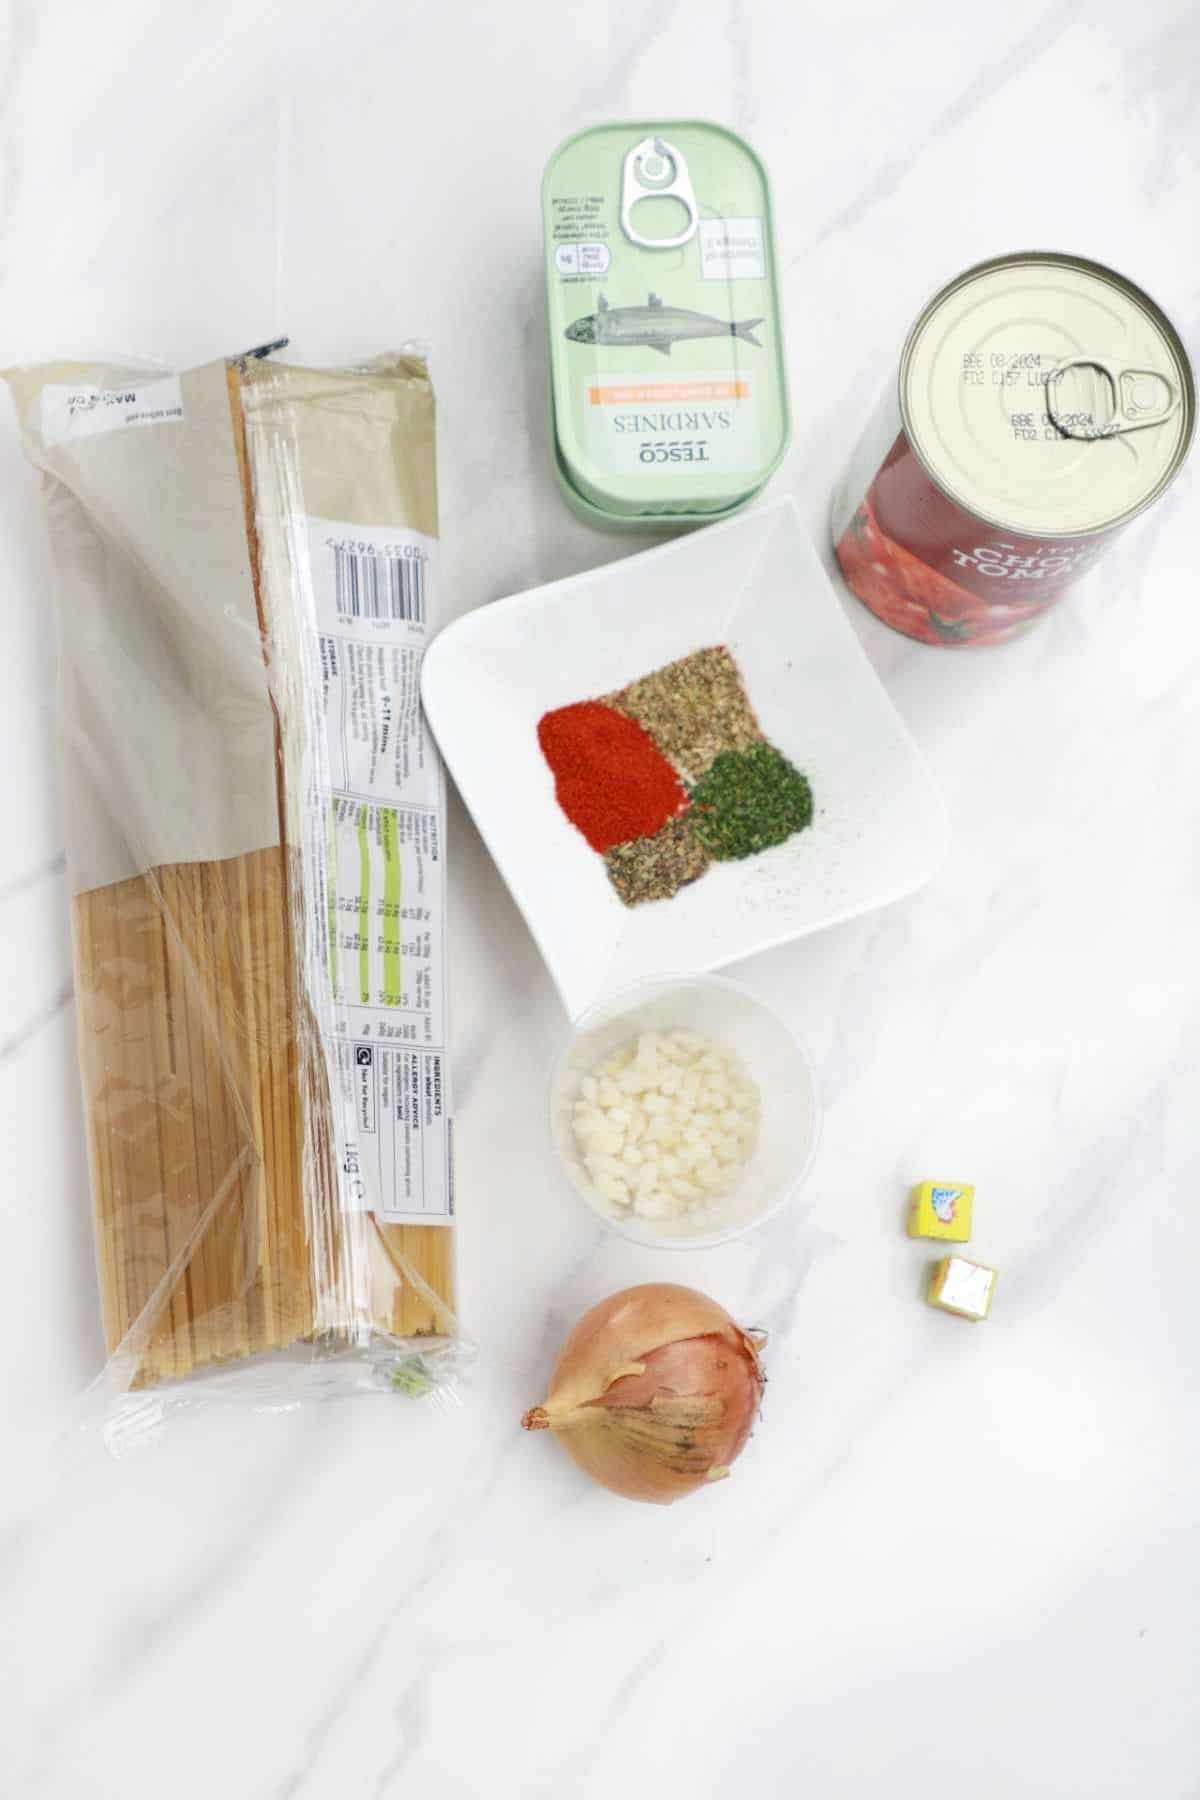 ingredients for the recipe displayed.